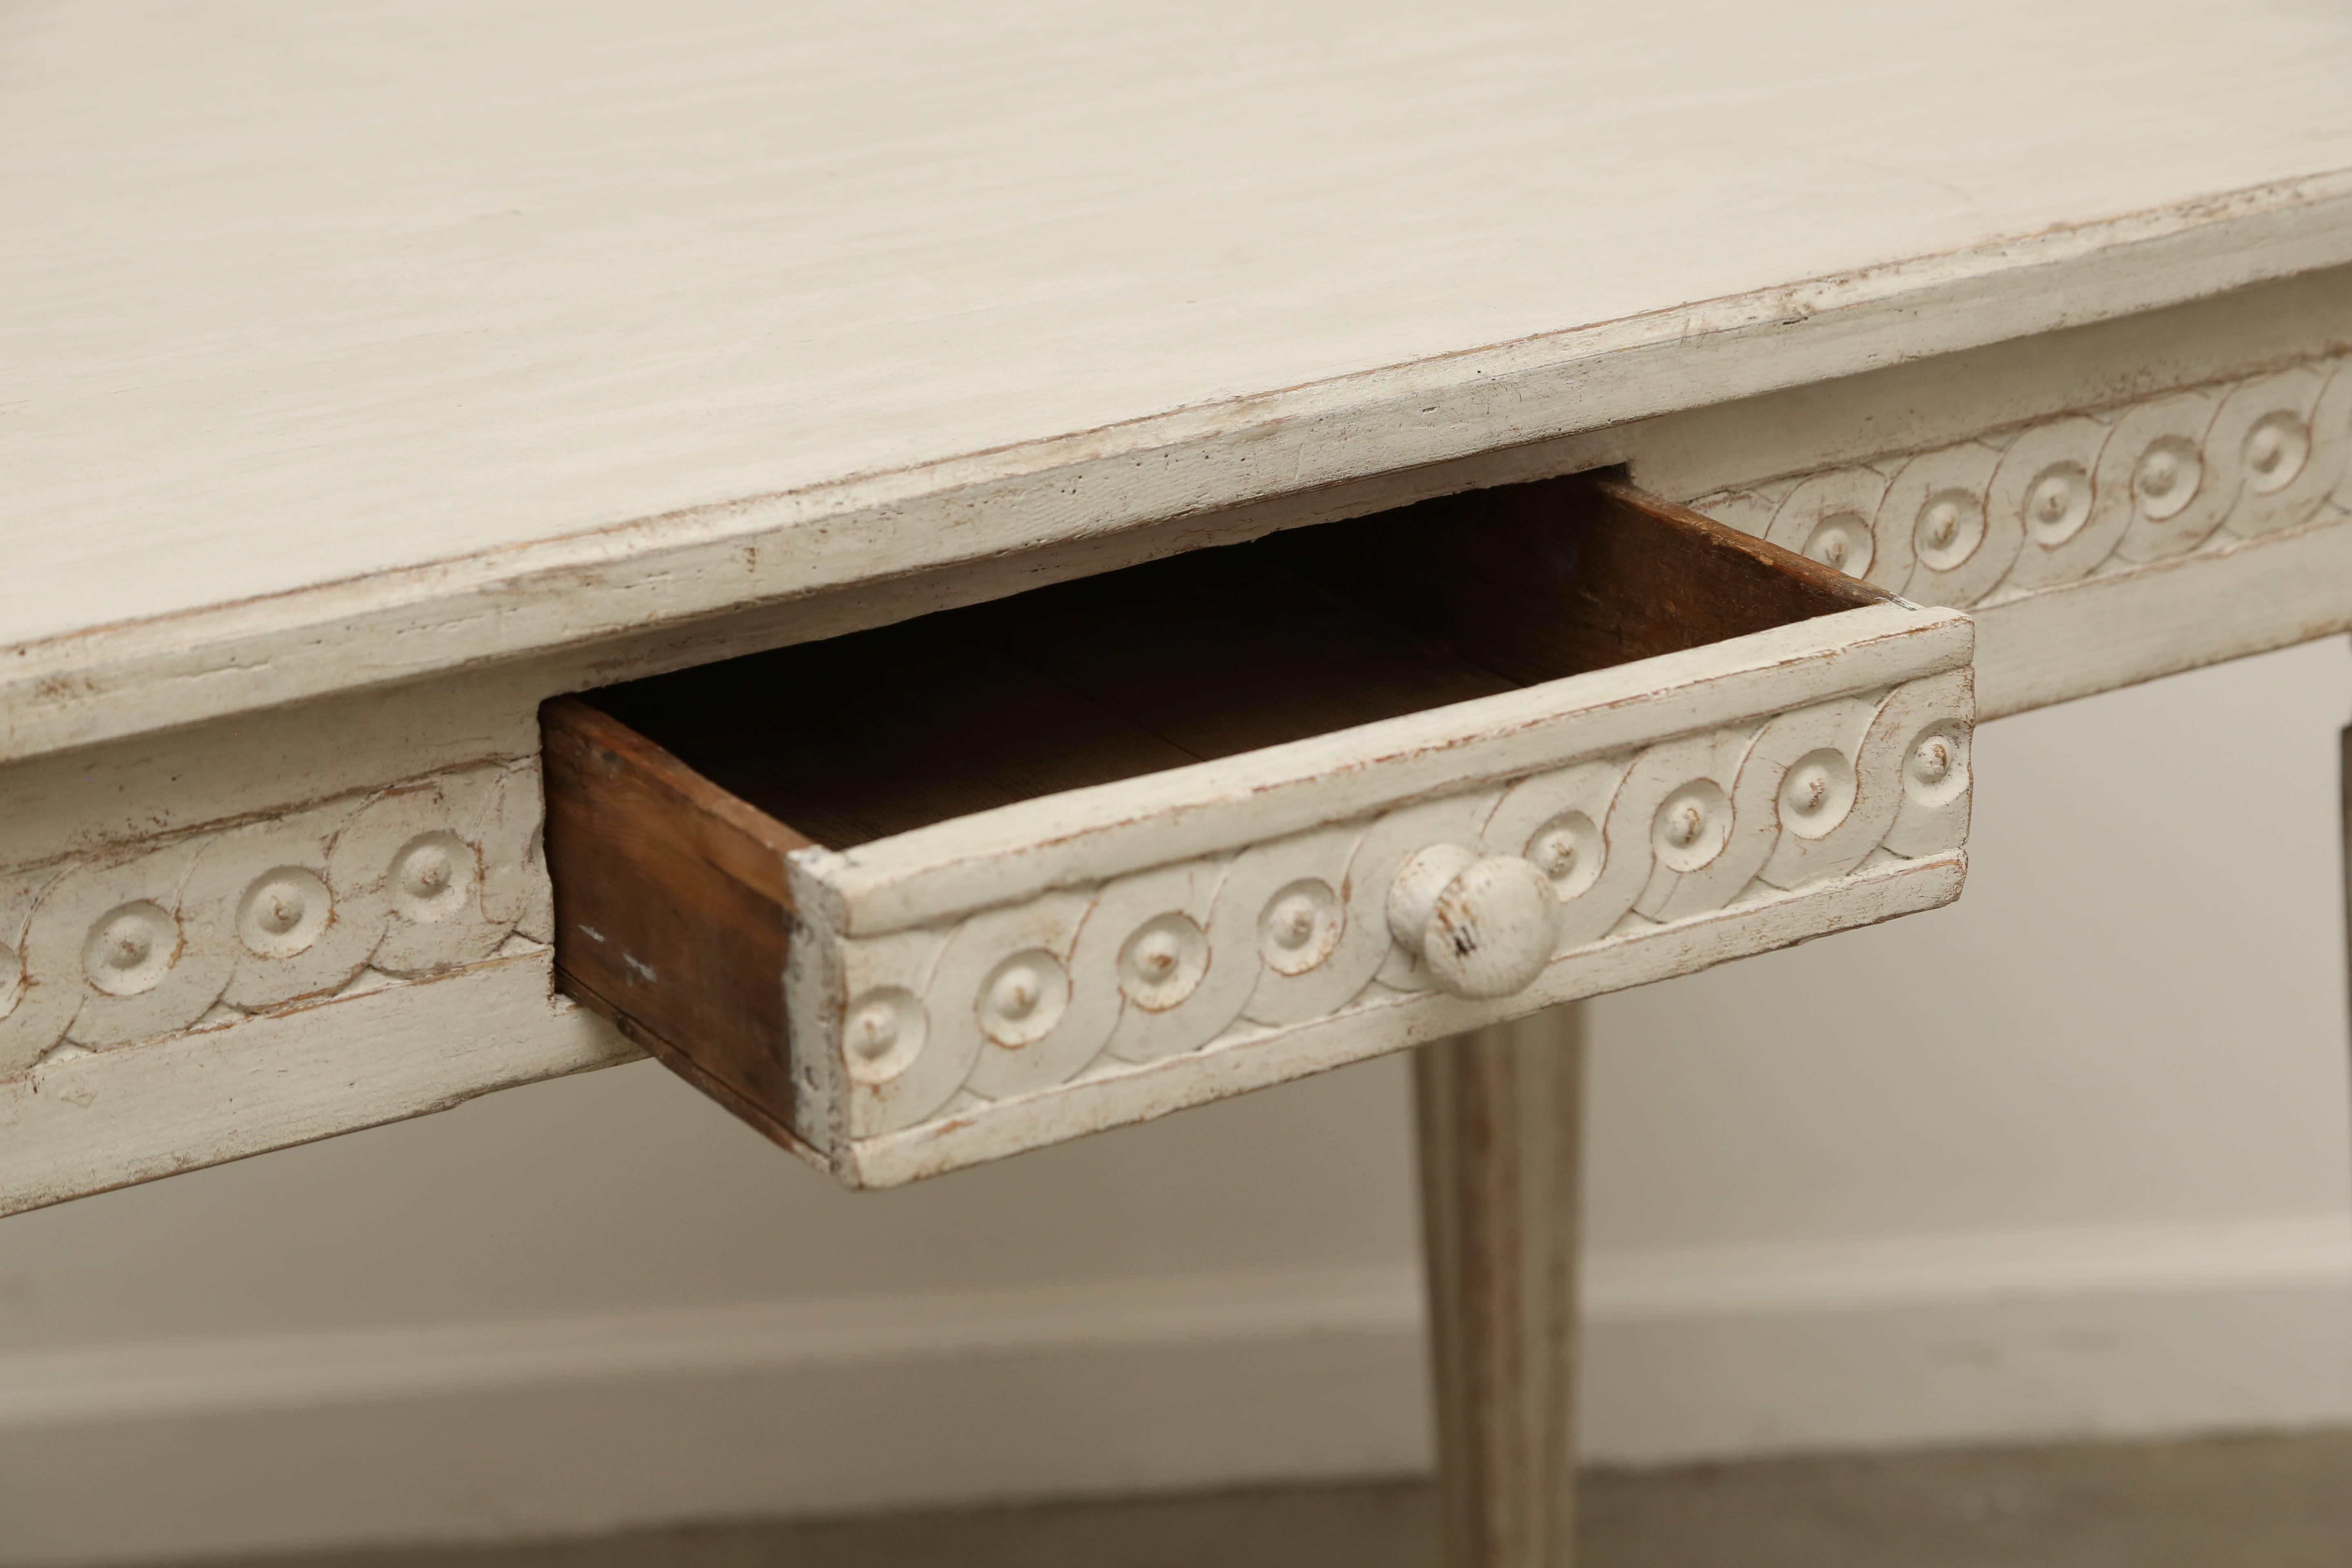 Antique Swedish painted Gustavian Style console table distressed painted in traditional Gustavian white. There is an interlocking circular border around the
apron and on the front of the drawer, carved rosettes on corners,tapered legs.
This console